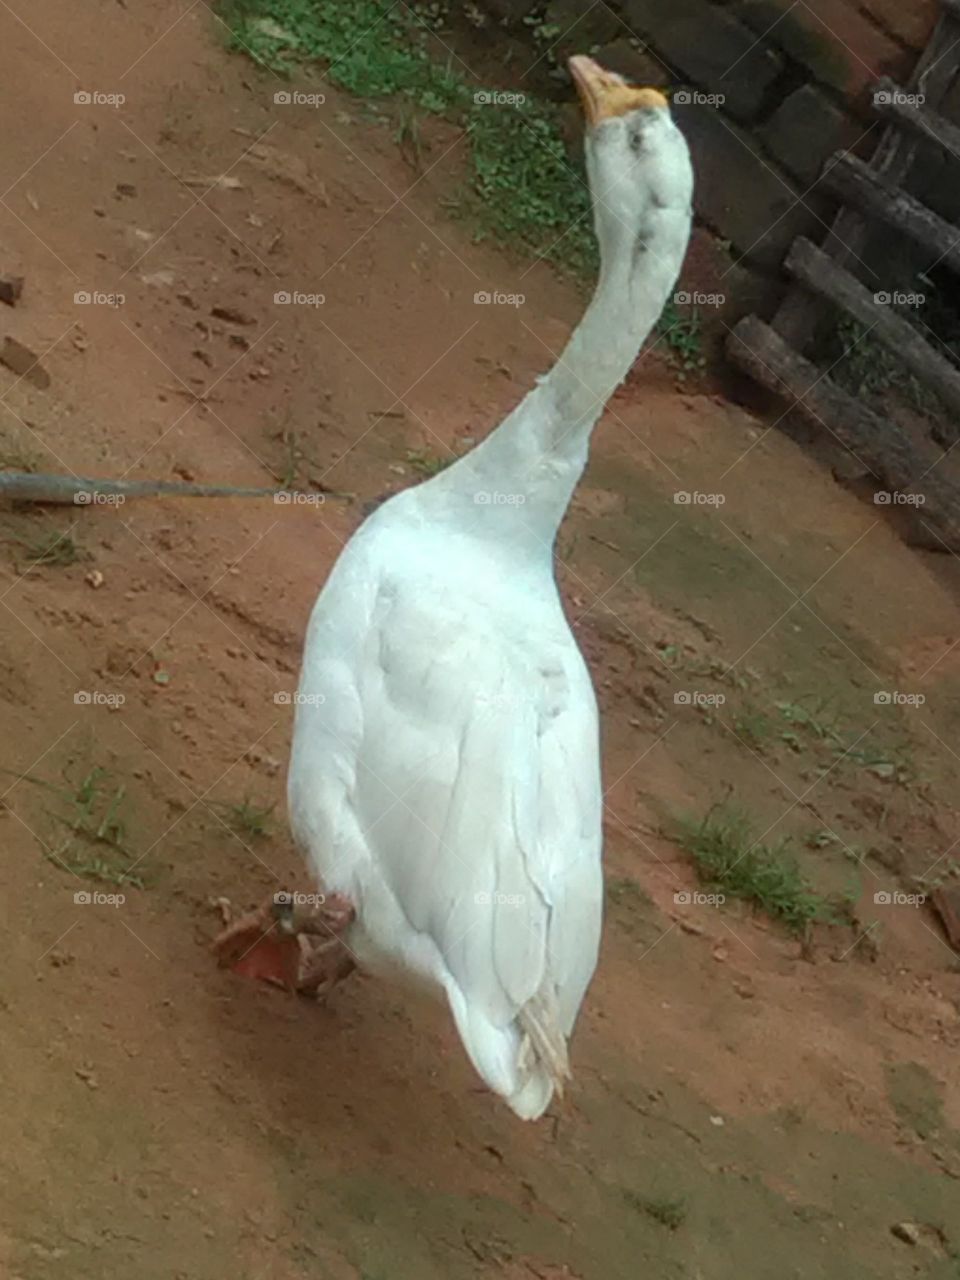 The very beautiful looking swan is the king of birds.